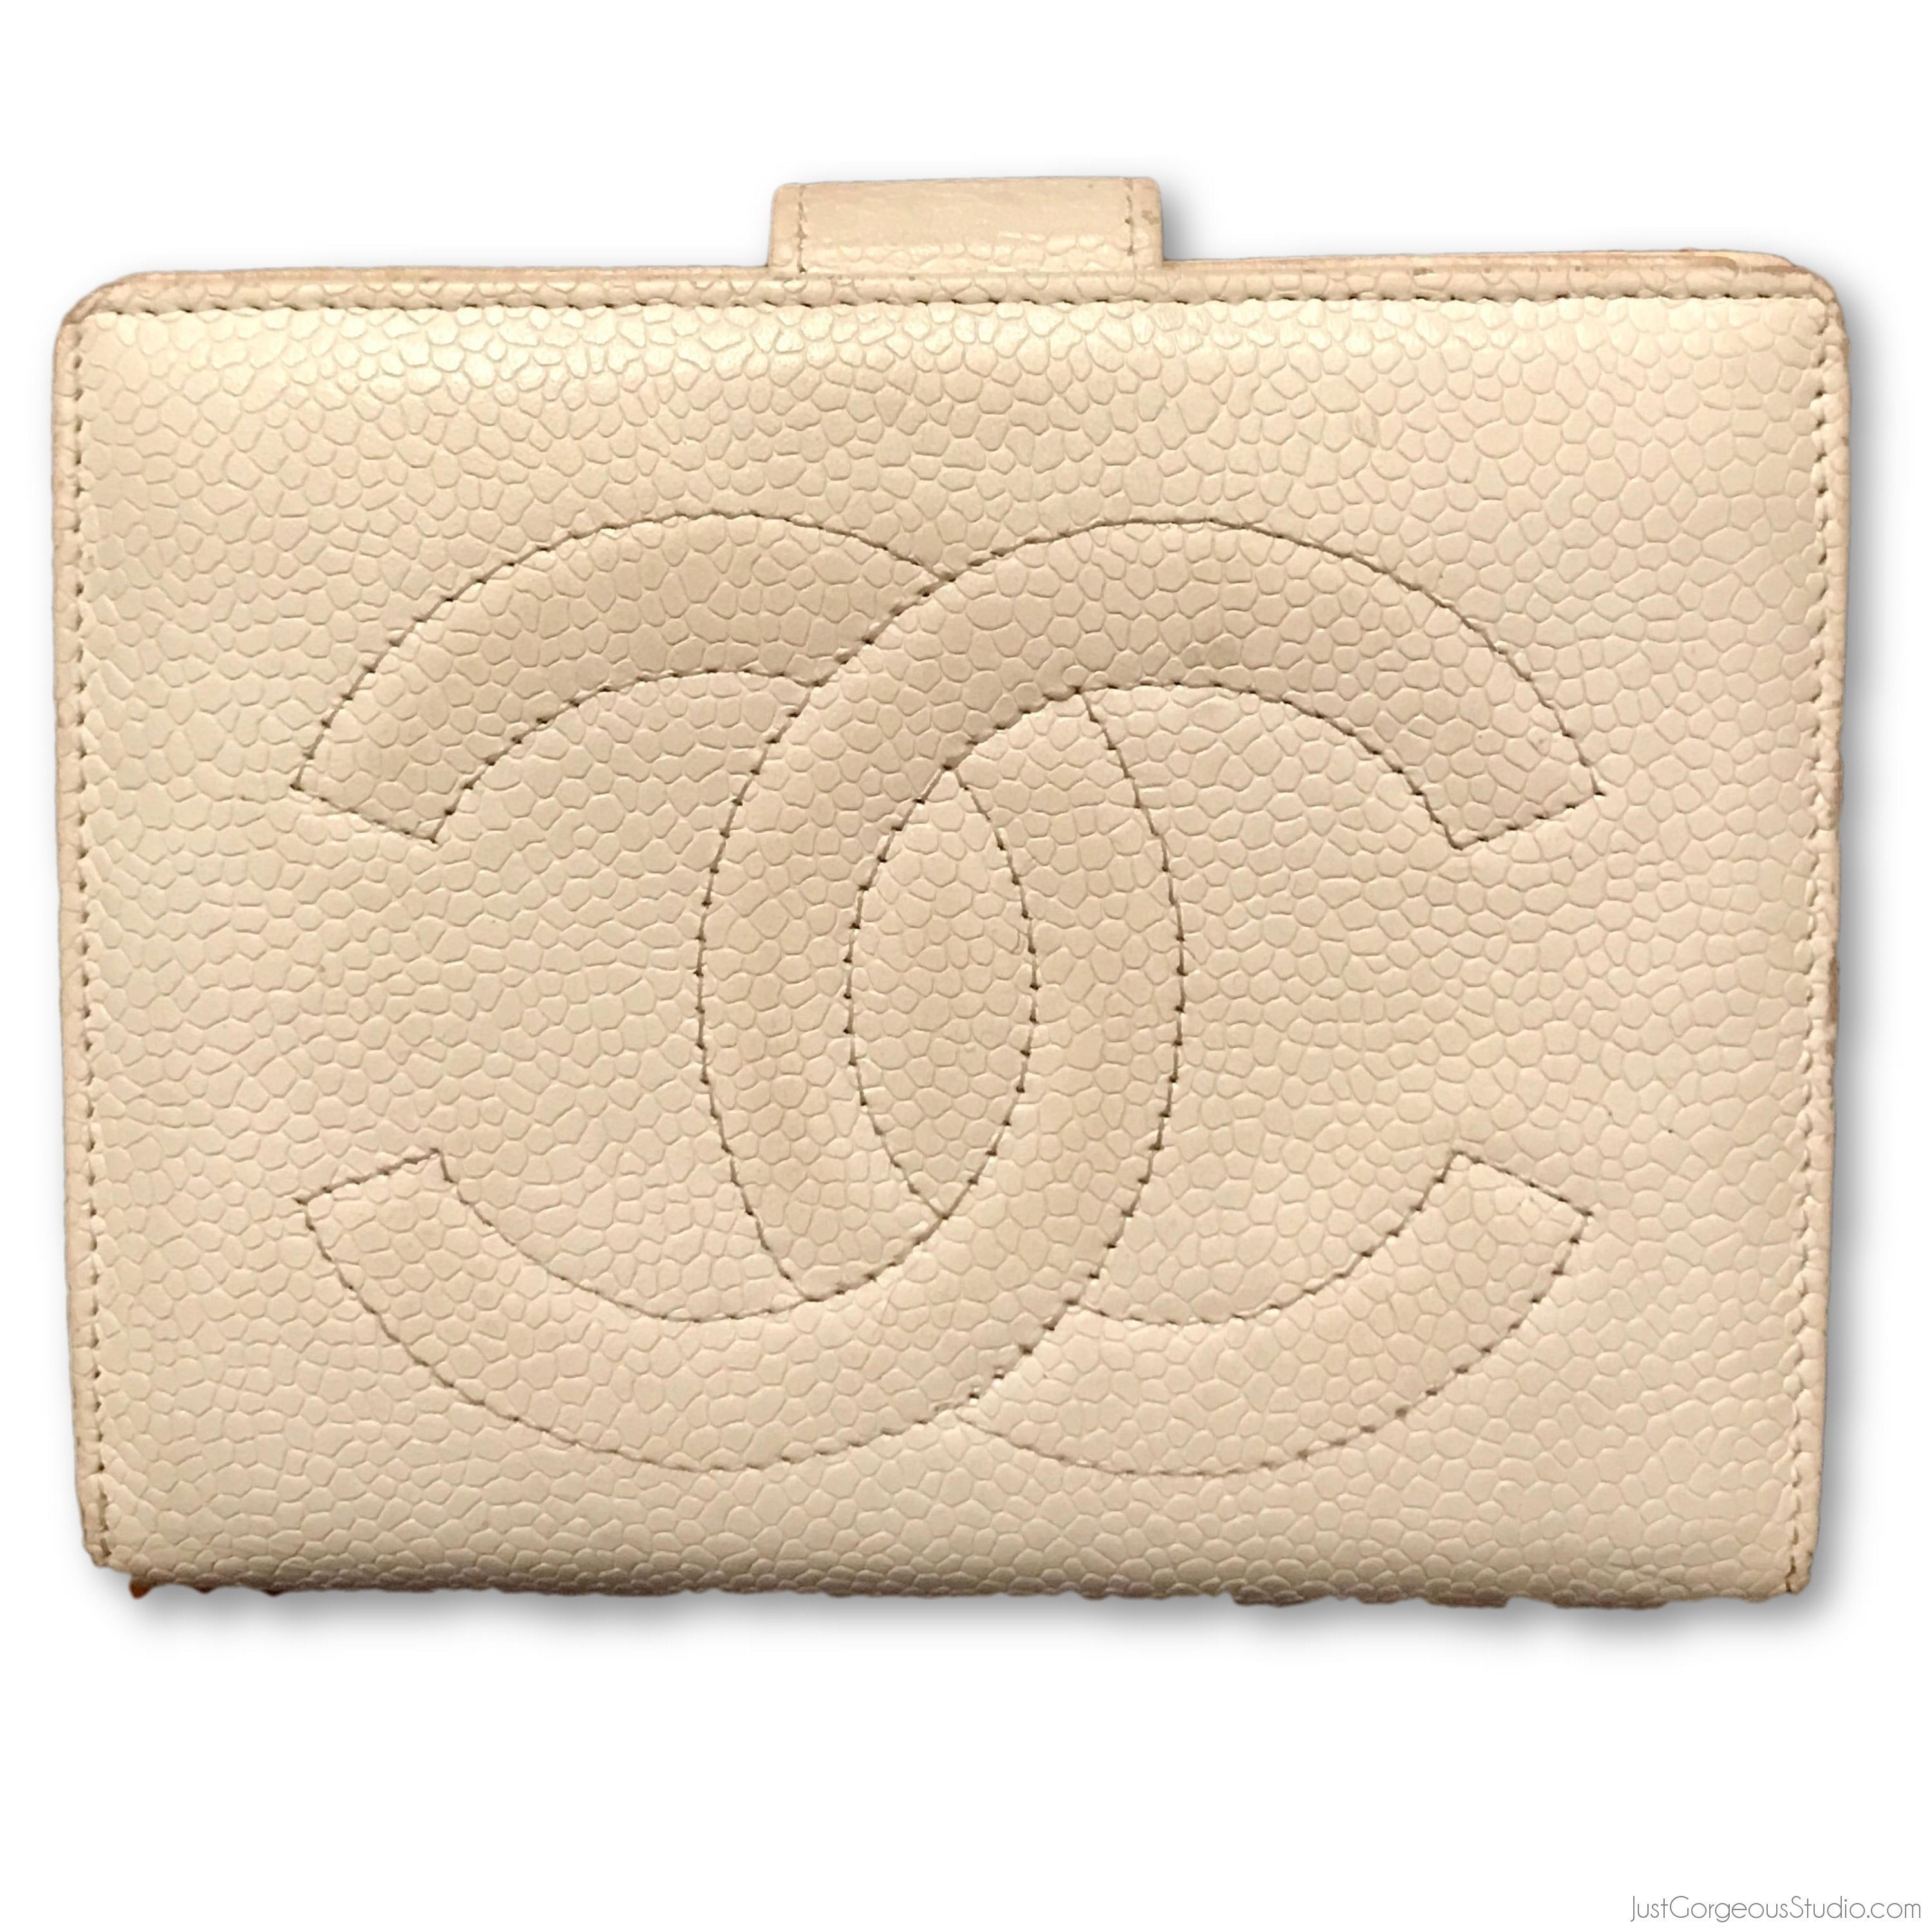 chanel classic flap wallet